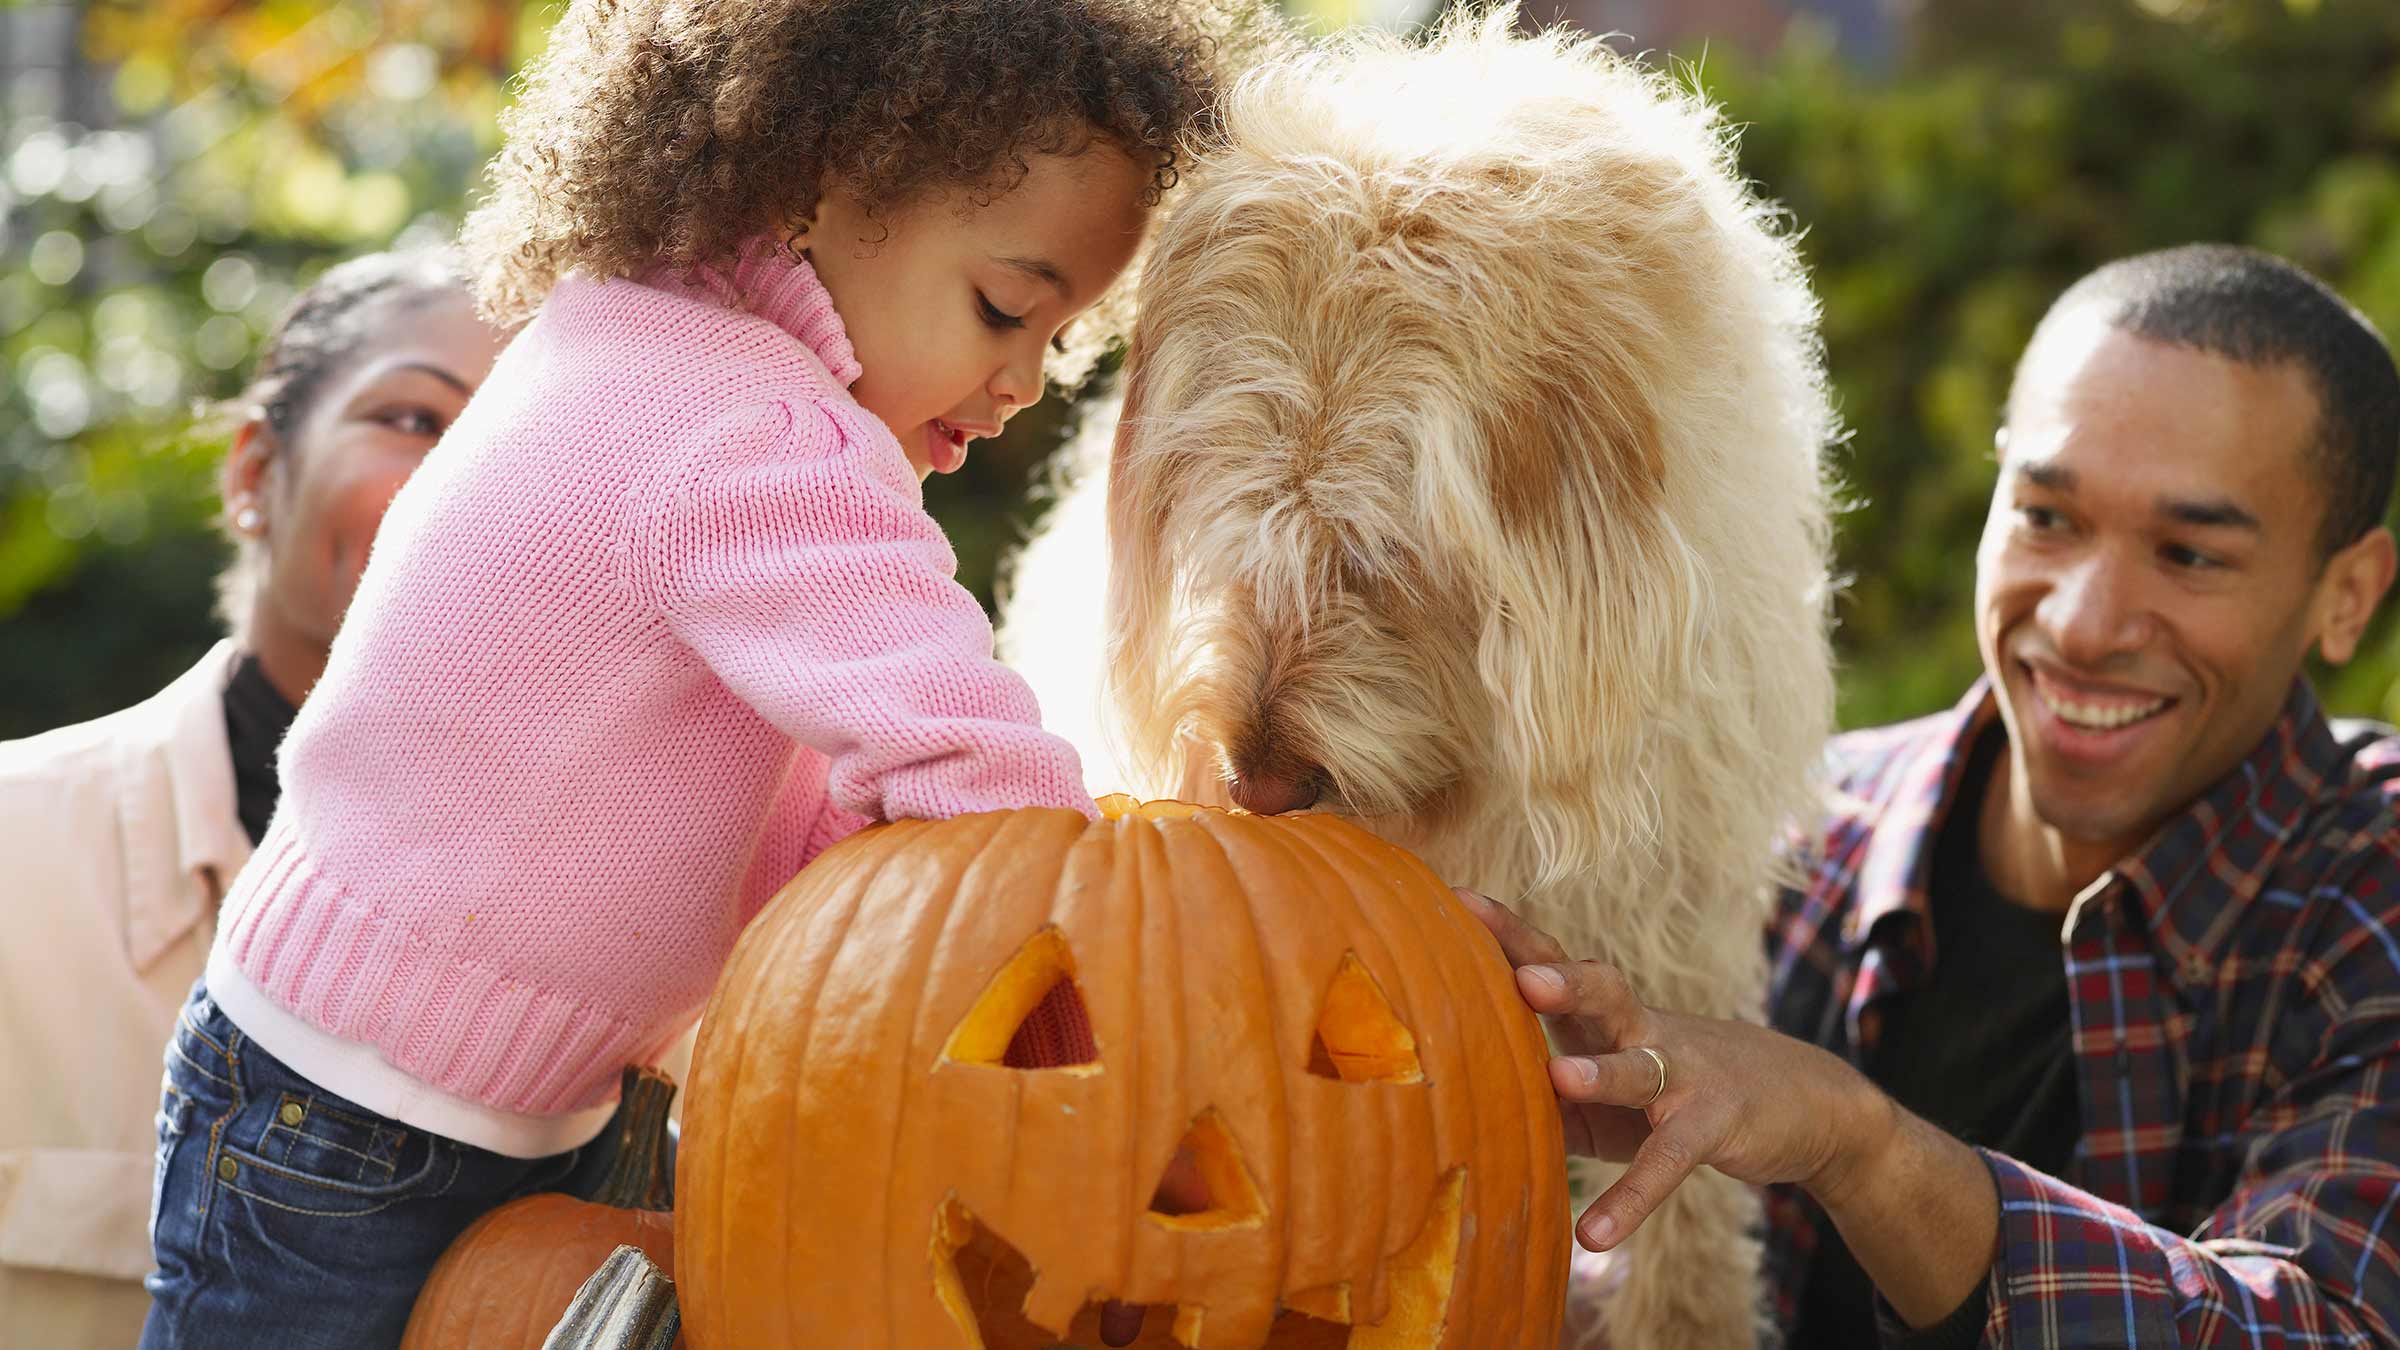 5 tips for how to carve a pumpkin safely